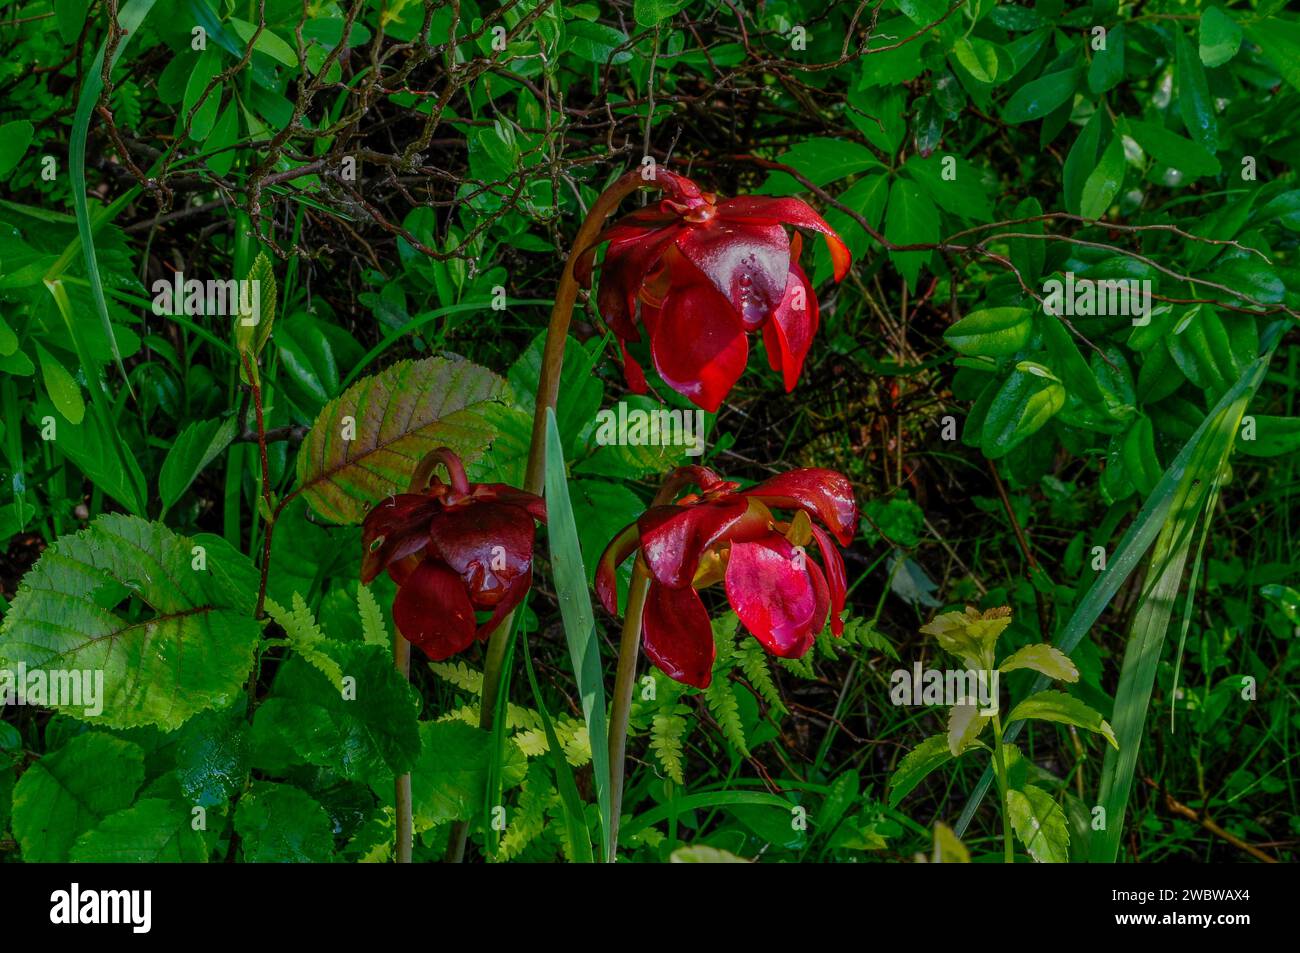 Flowers of the Pitcher Plant, Sarracenia Purpurea, which is a carnivoruos plant that grows in peat bogs. Stock Photo